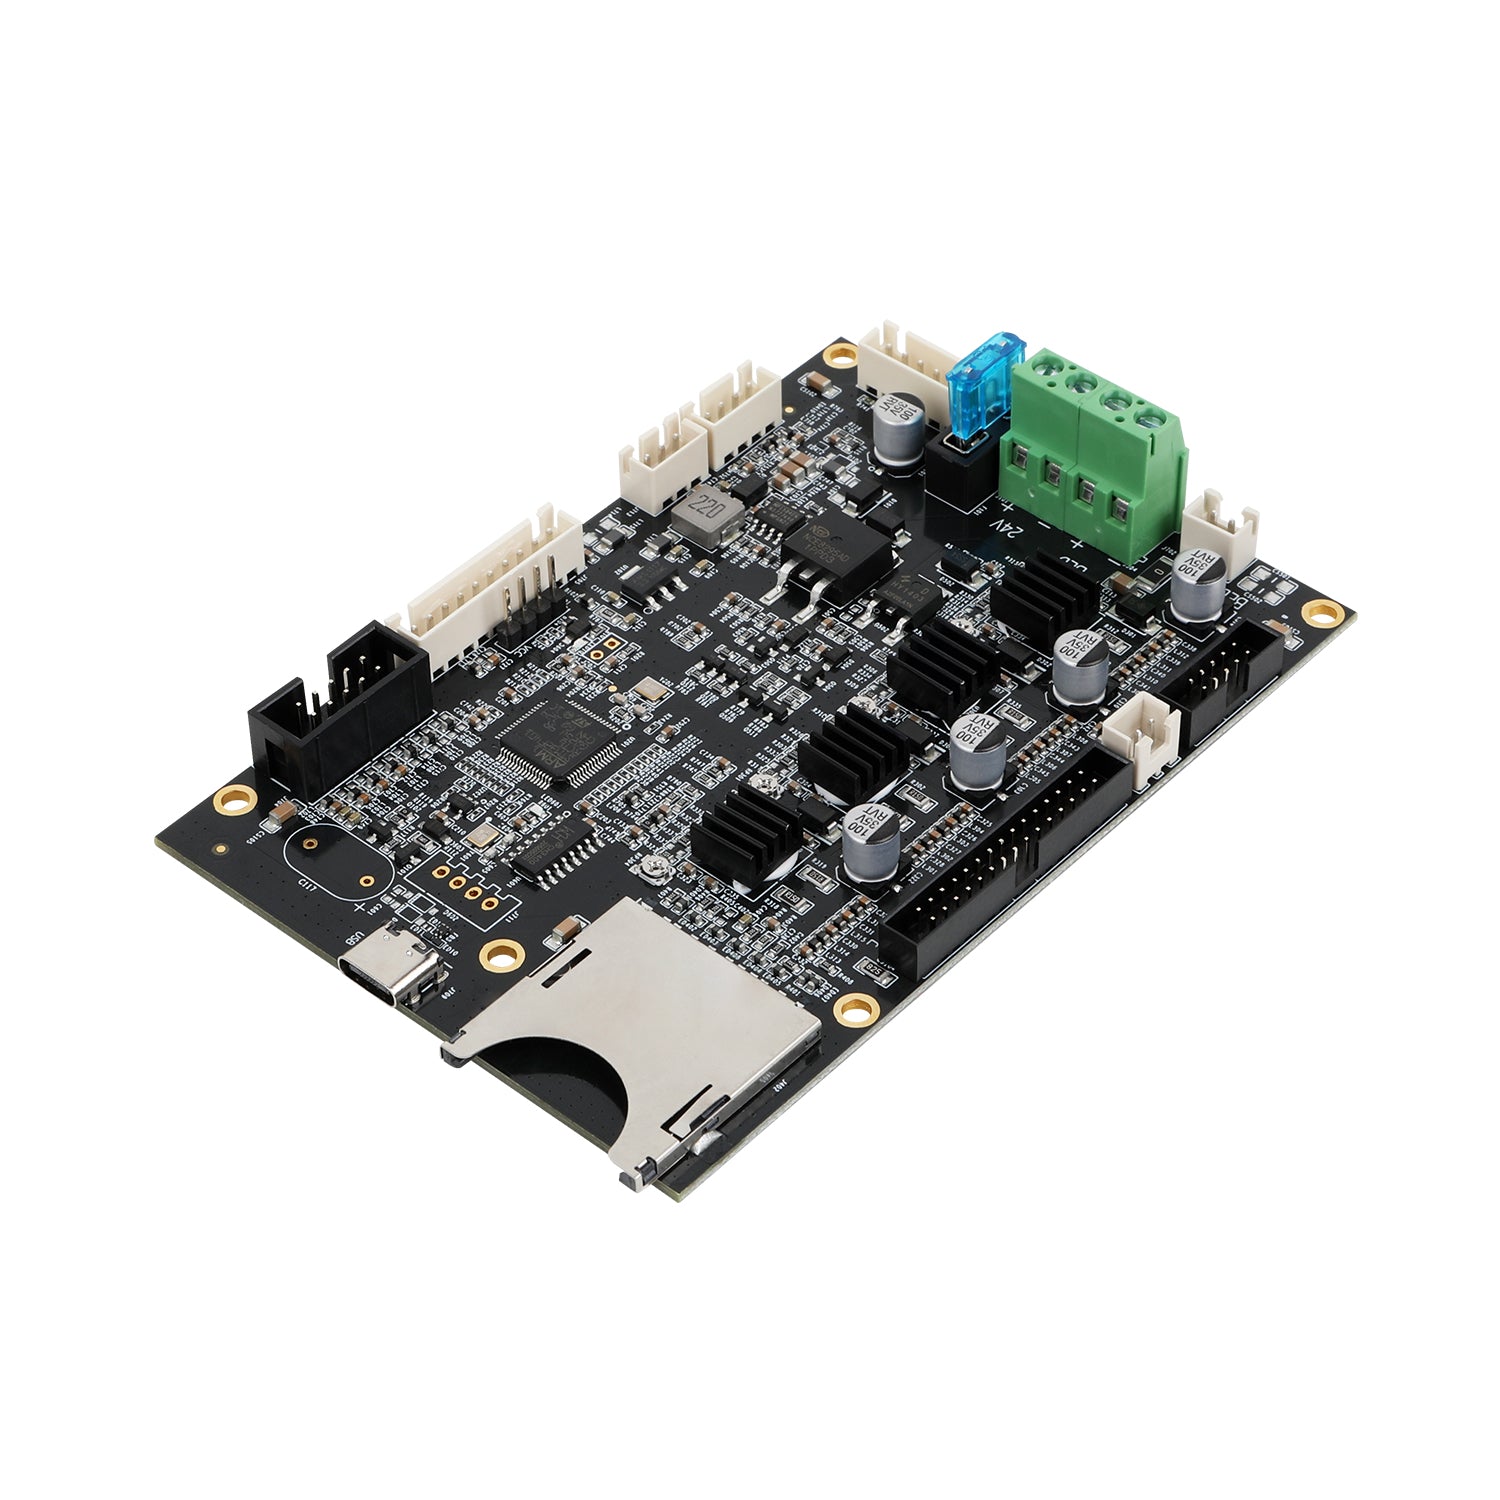 Ender-3 S1 Mainboard Kit (Now in Stock!)